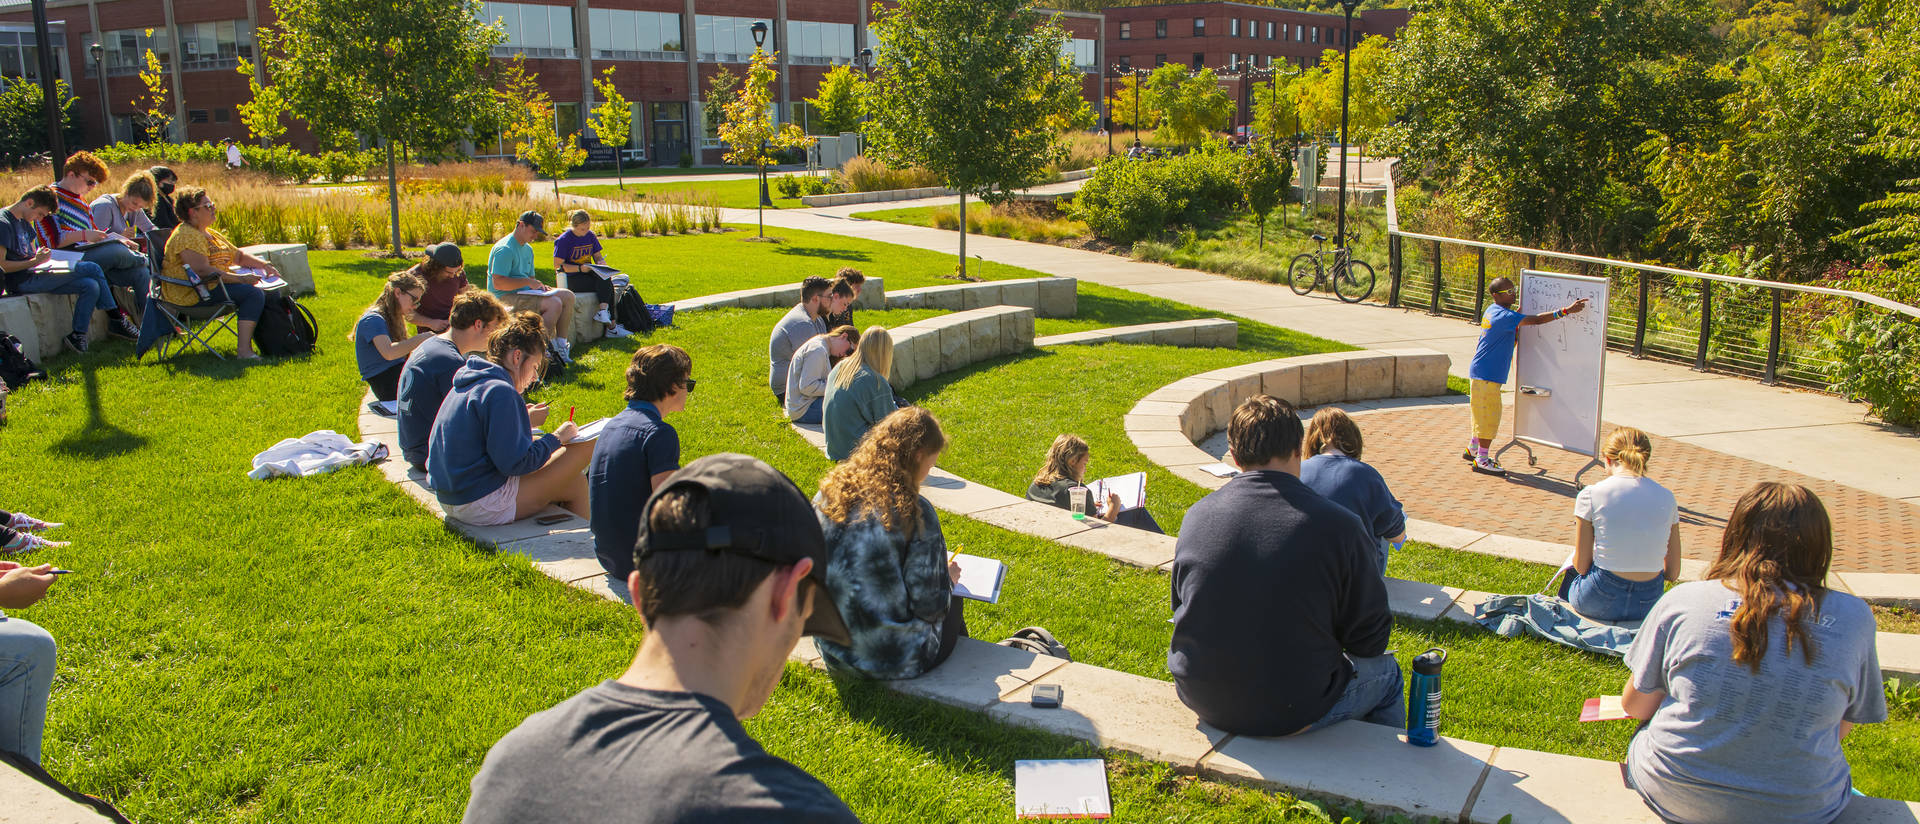 A class sits in the outdoor classroom on campus during a sunny day.